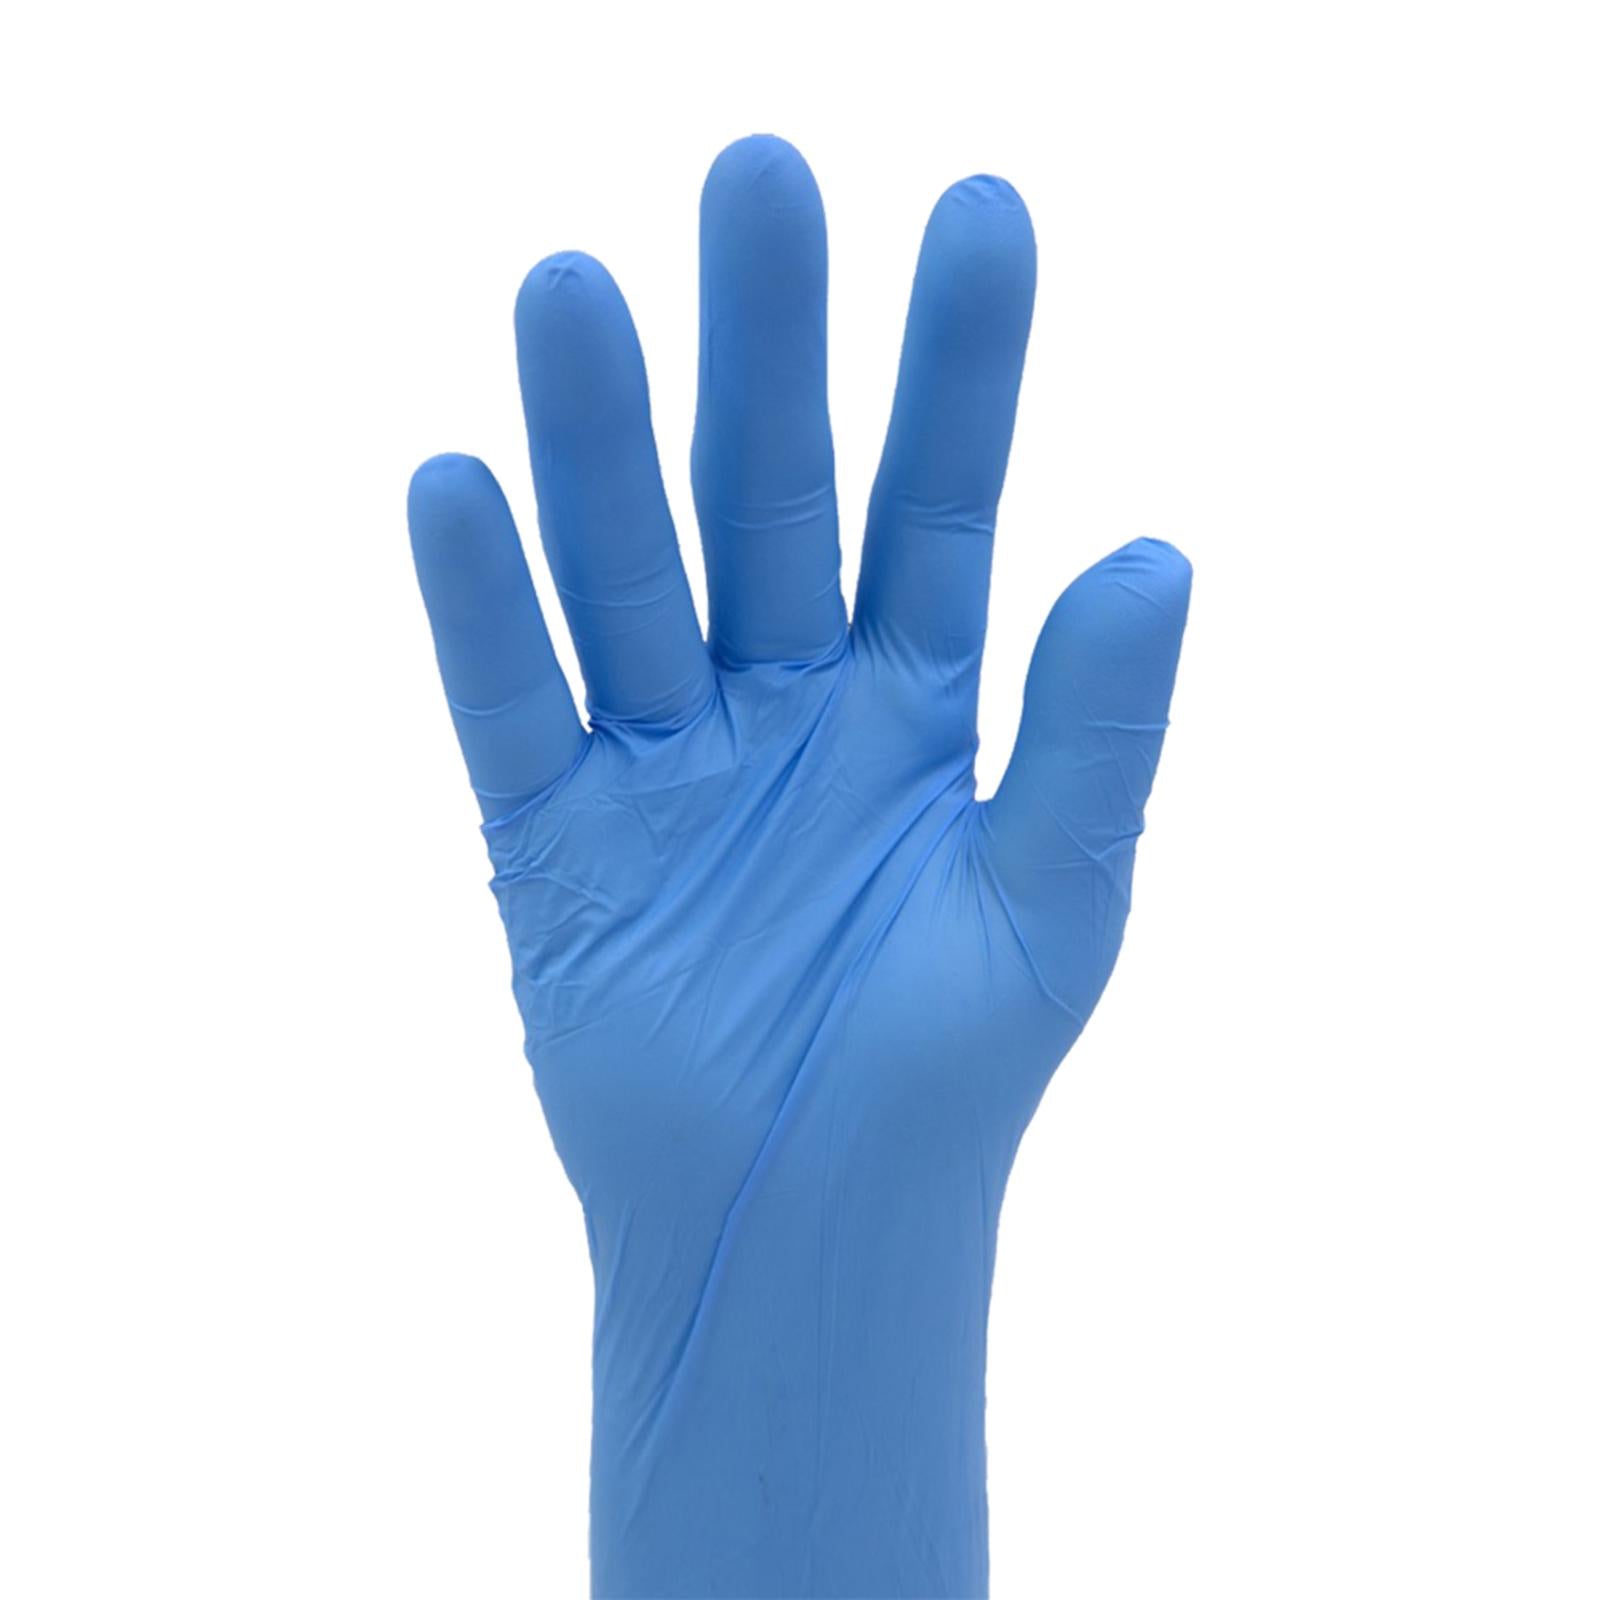 10Pcs Strong Nitrile Gloves Powder Free Pet Care Protective Gloves Blue S